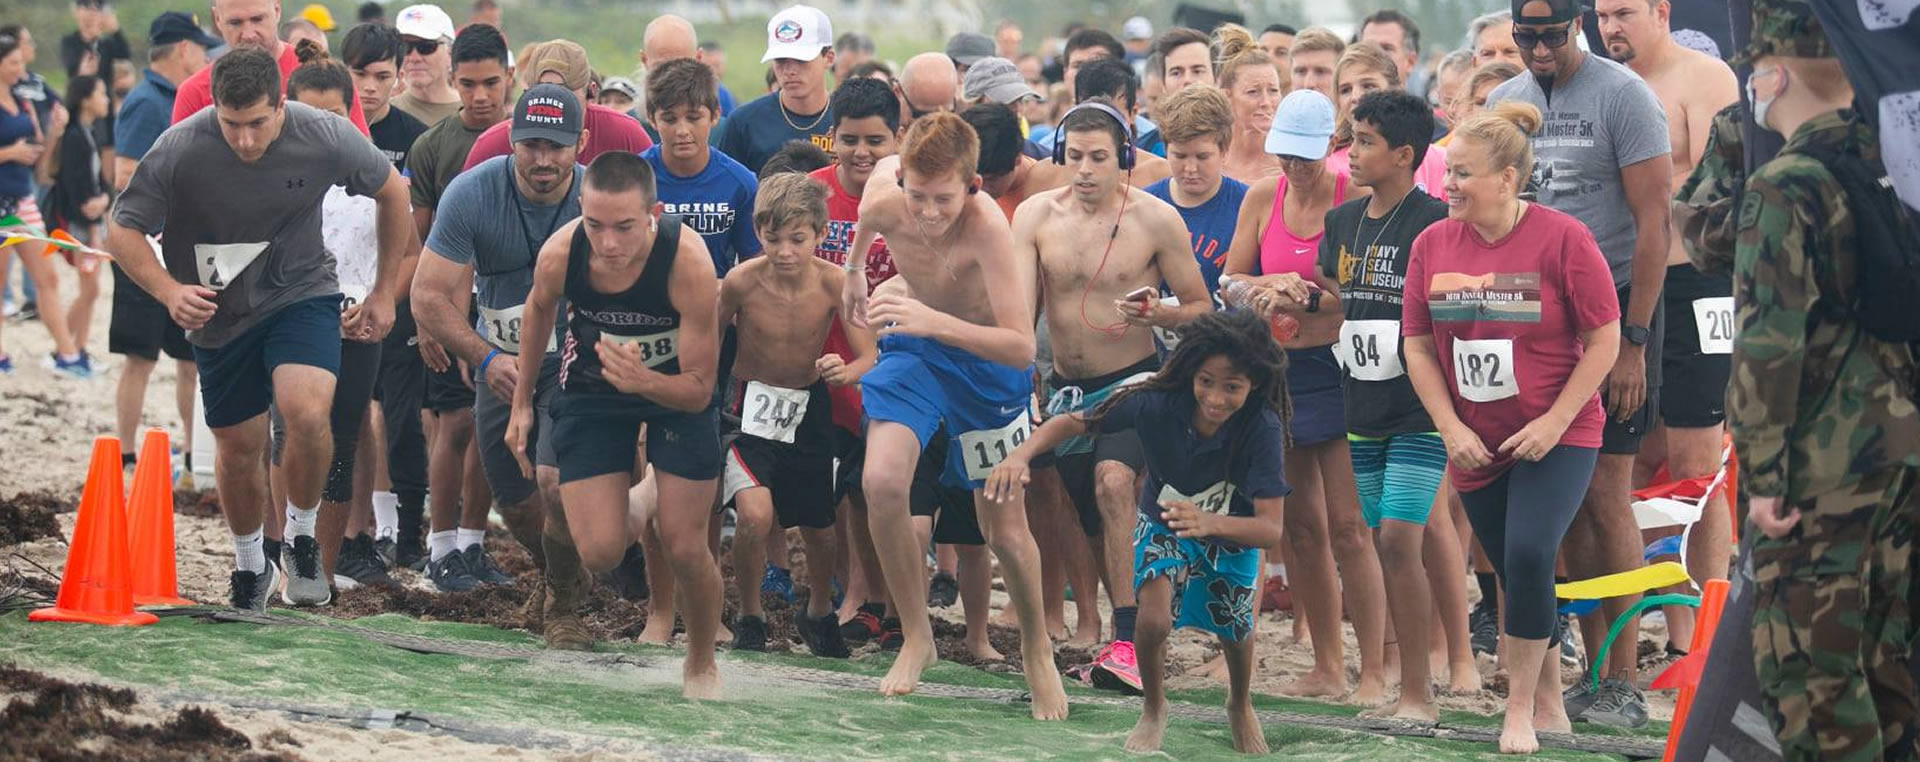 The 19th Annual Muster 5K Beach Challenge